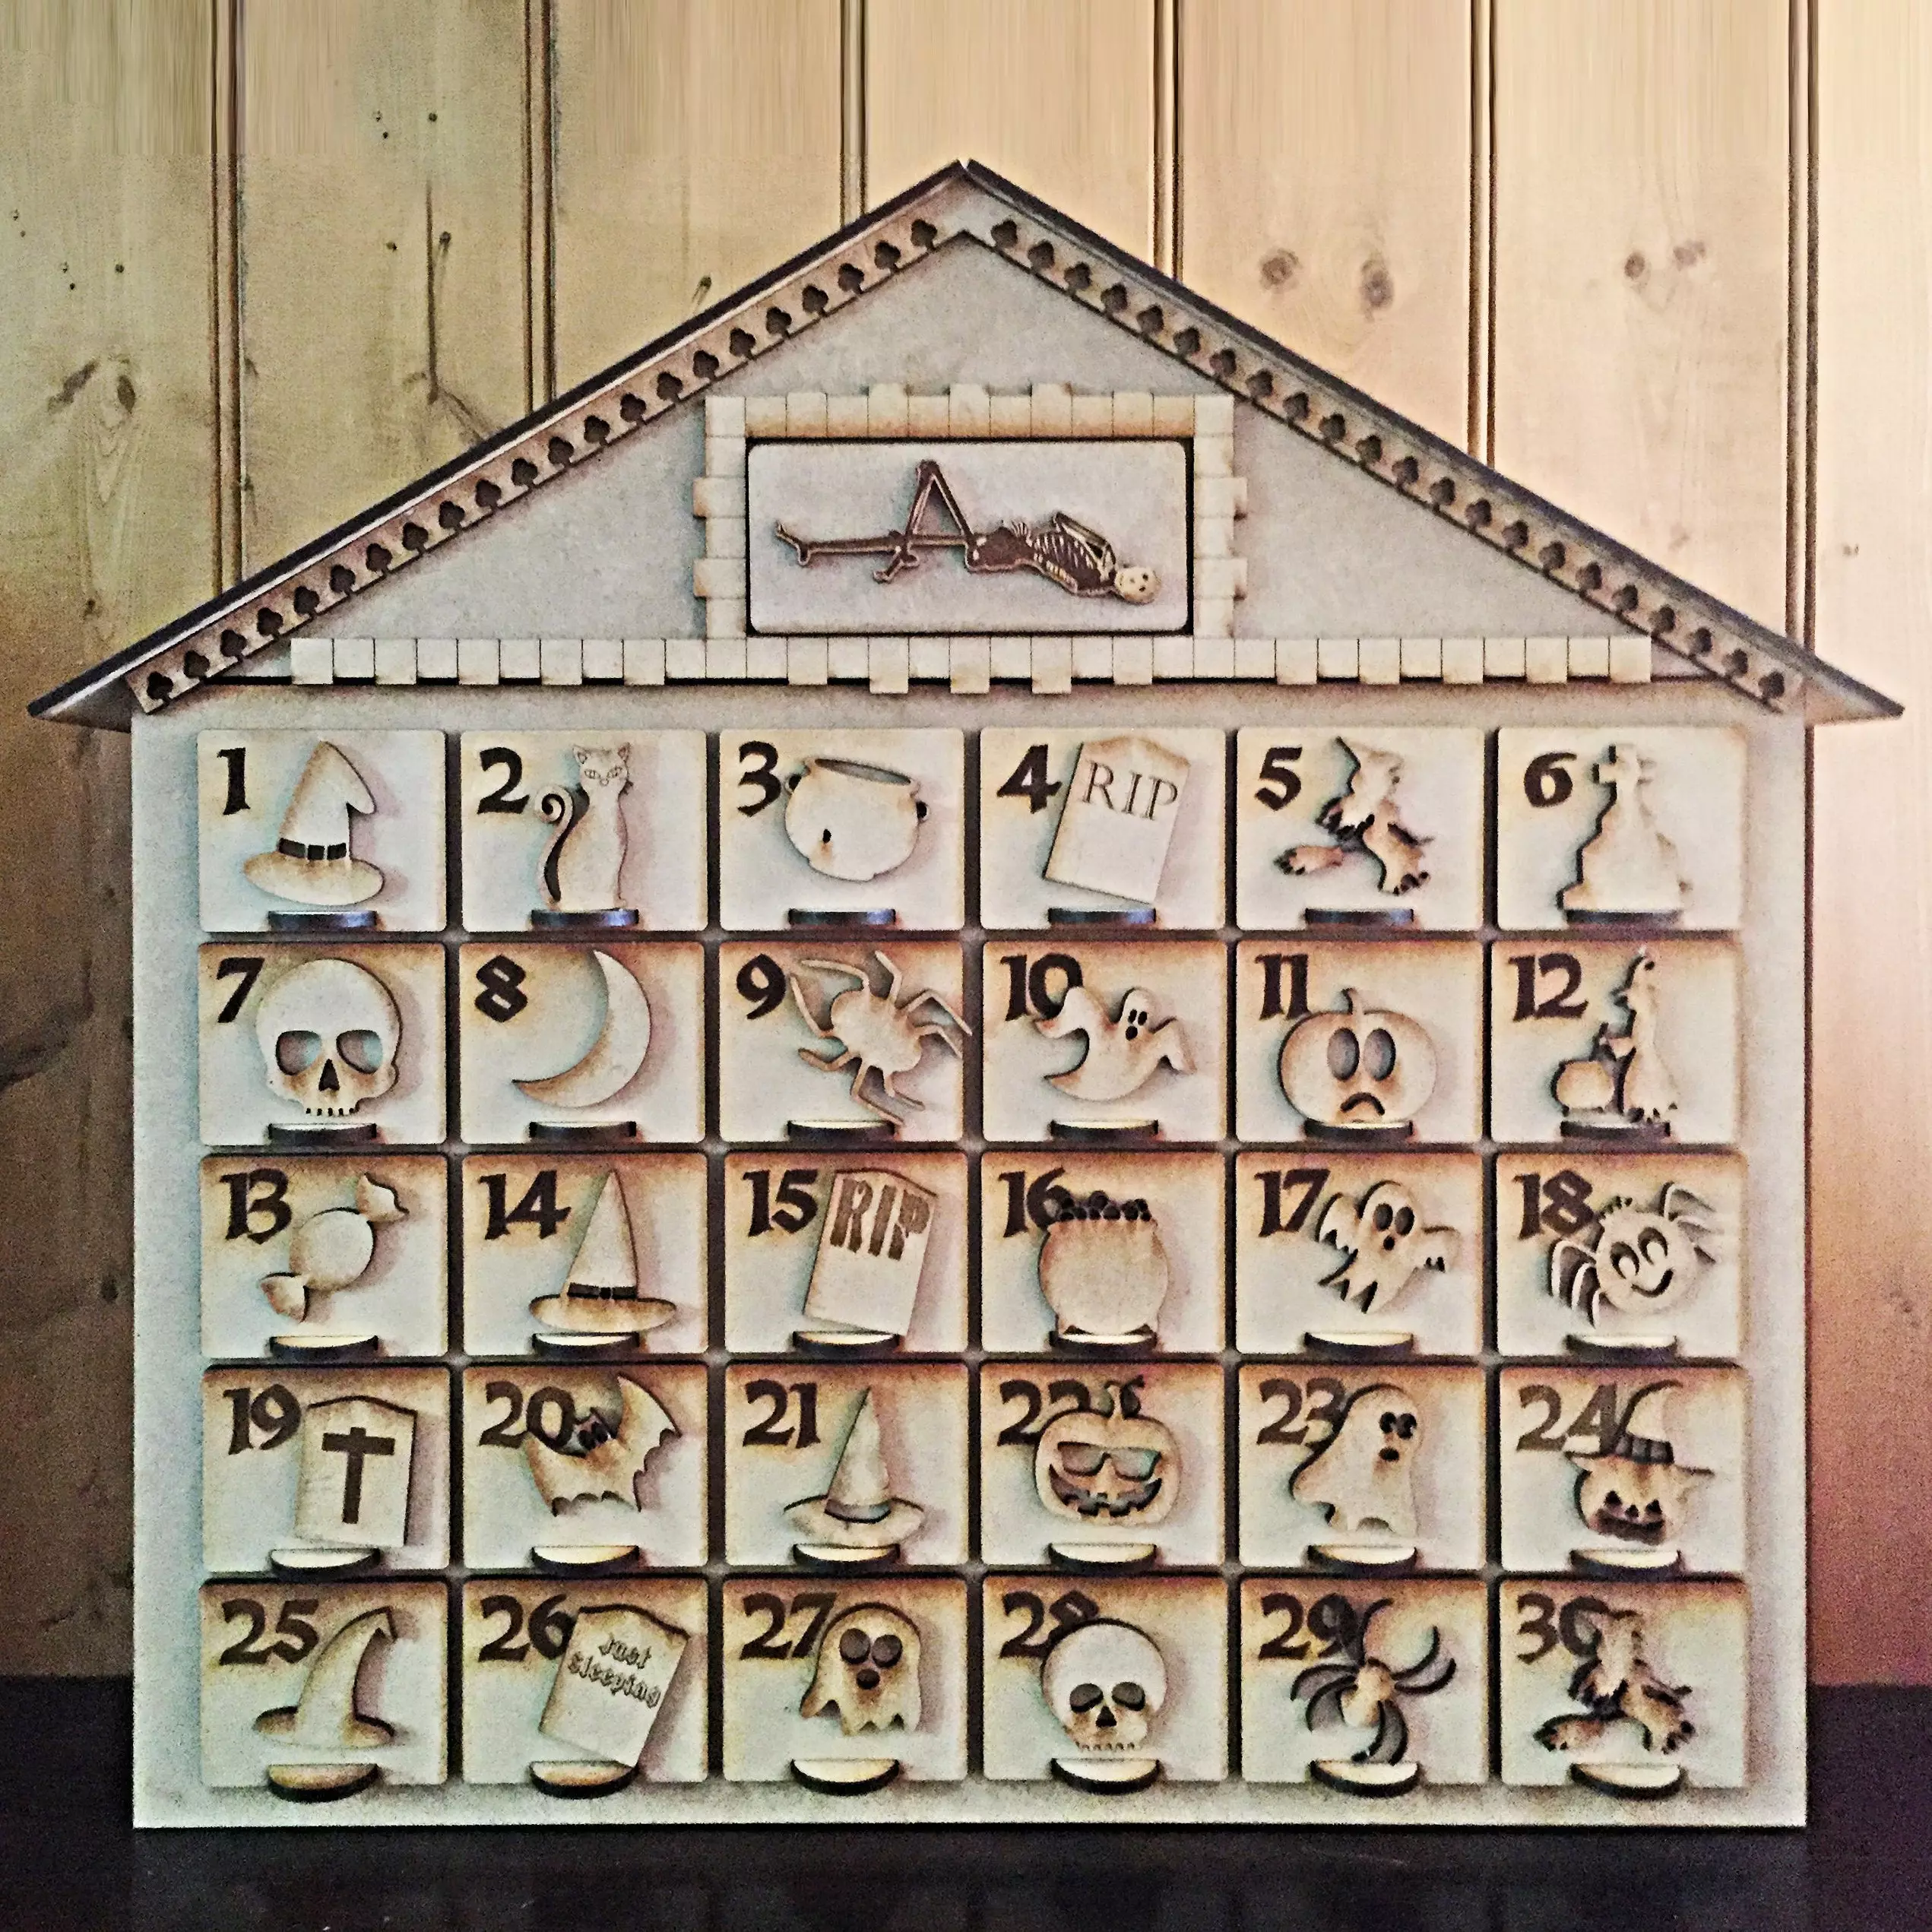 A wooden carved Halloween advent calendar is also available (